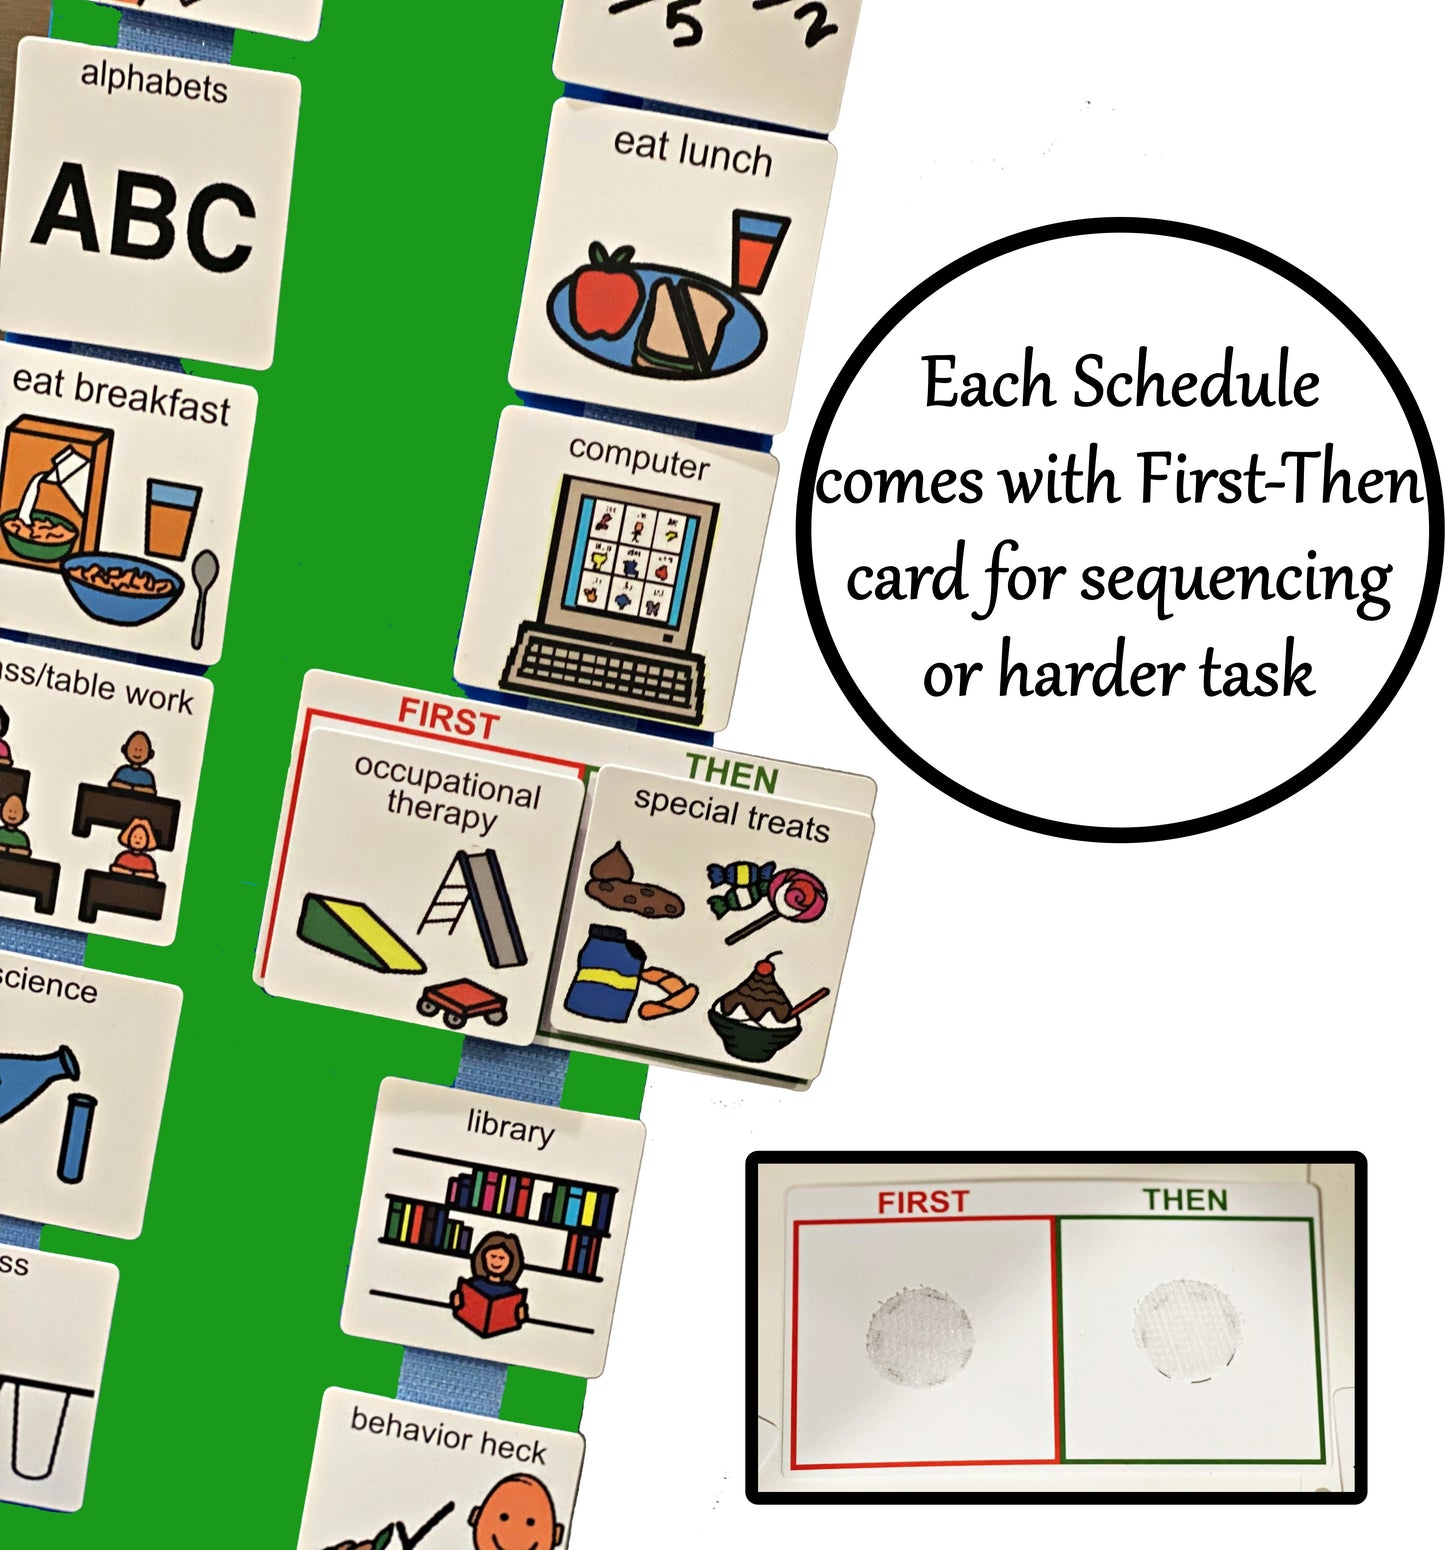 Daily home Visual Schedule Kit -Great Behavior Tool for any Children to Learn Independence and Structure 60 Cards Home & Chores Activity Visual Themed Picture Cards